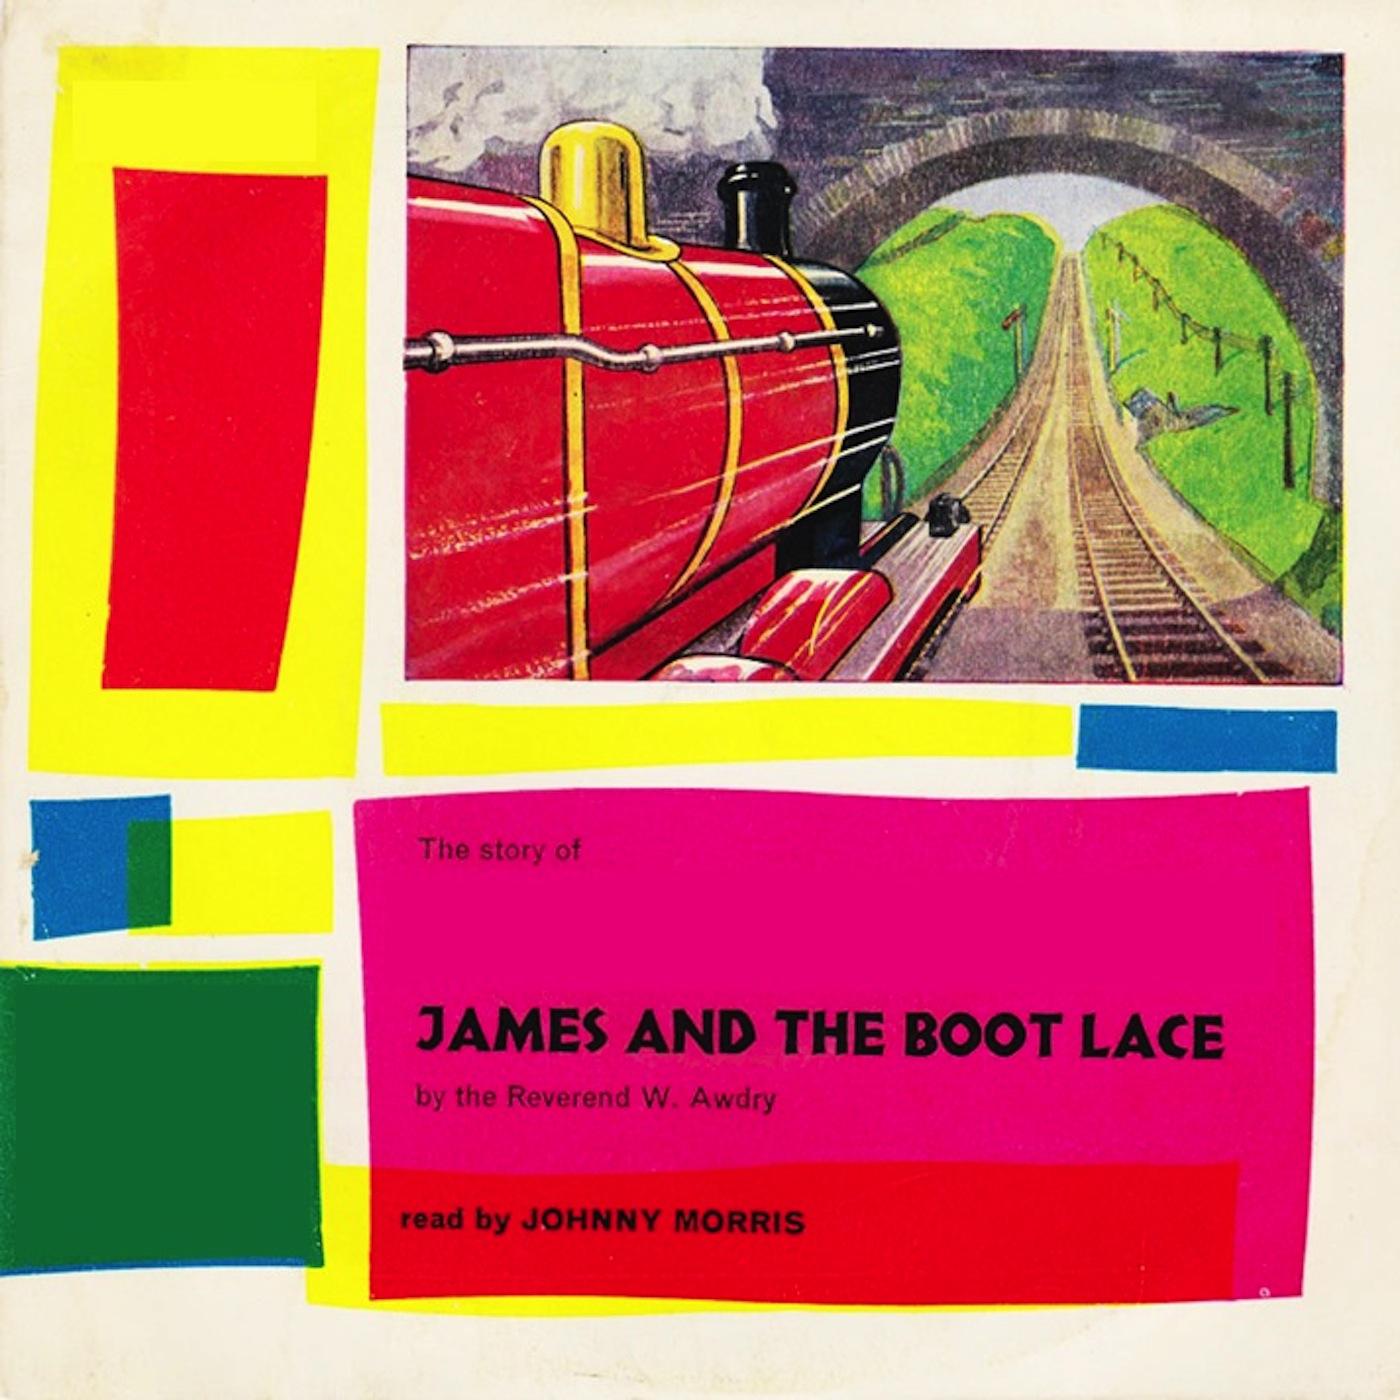 James and the Bootlace